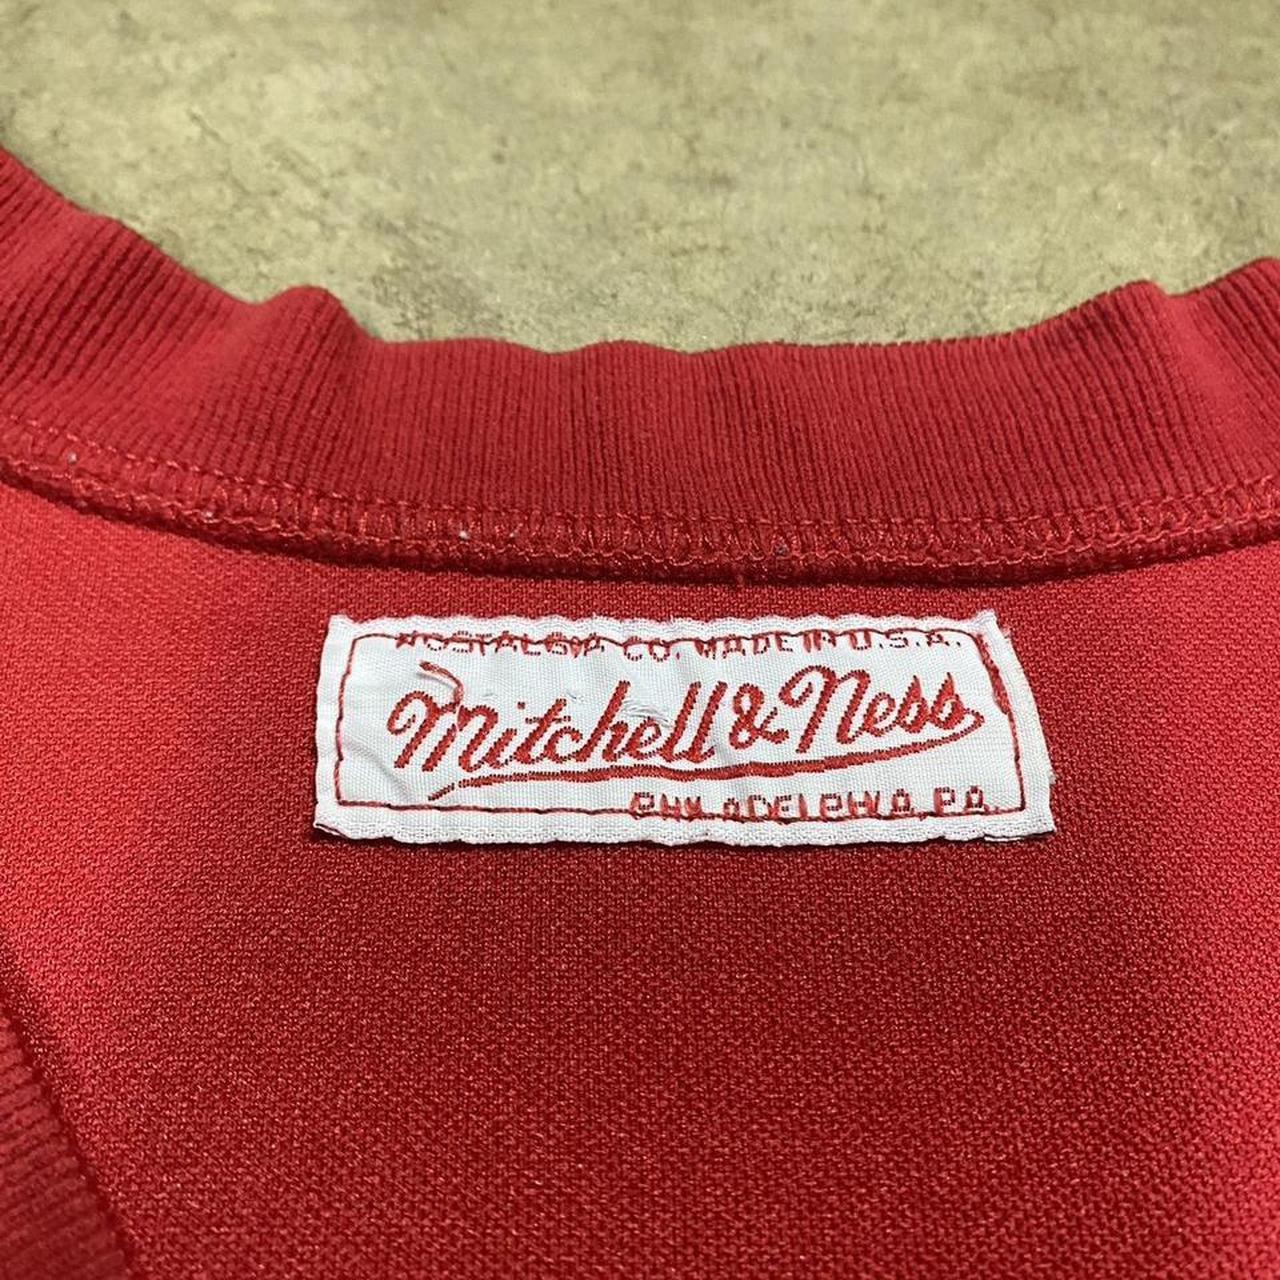 Vintage Mitchell and Ness St. Louis Cardinals - Depop